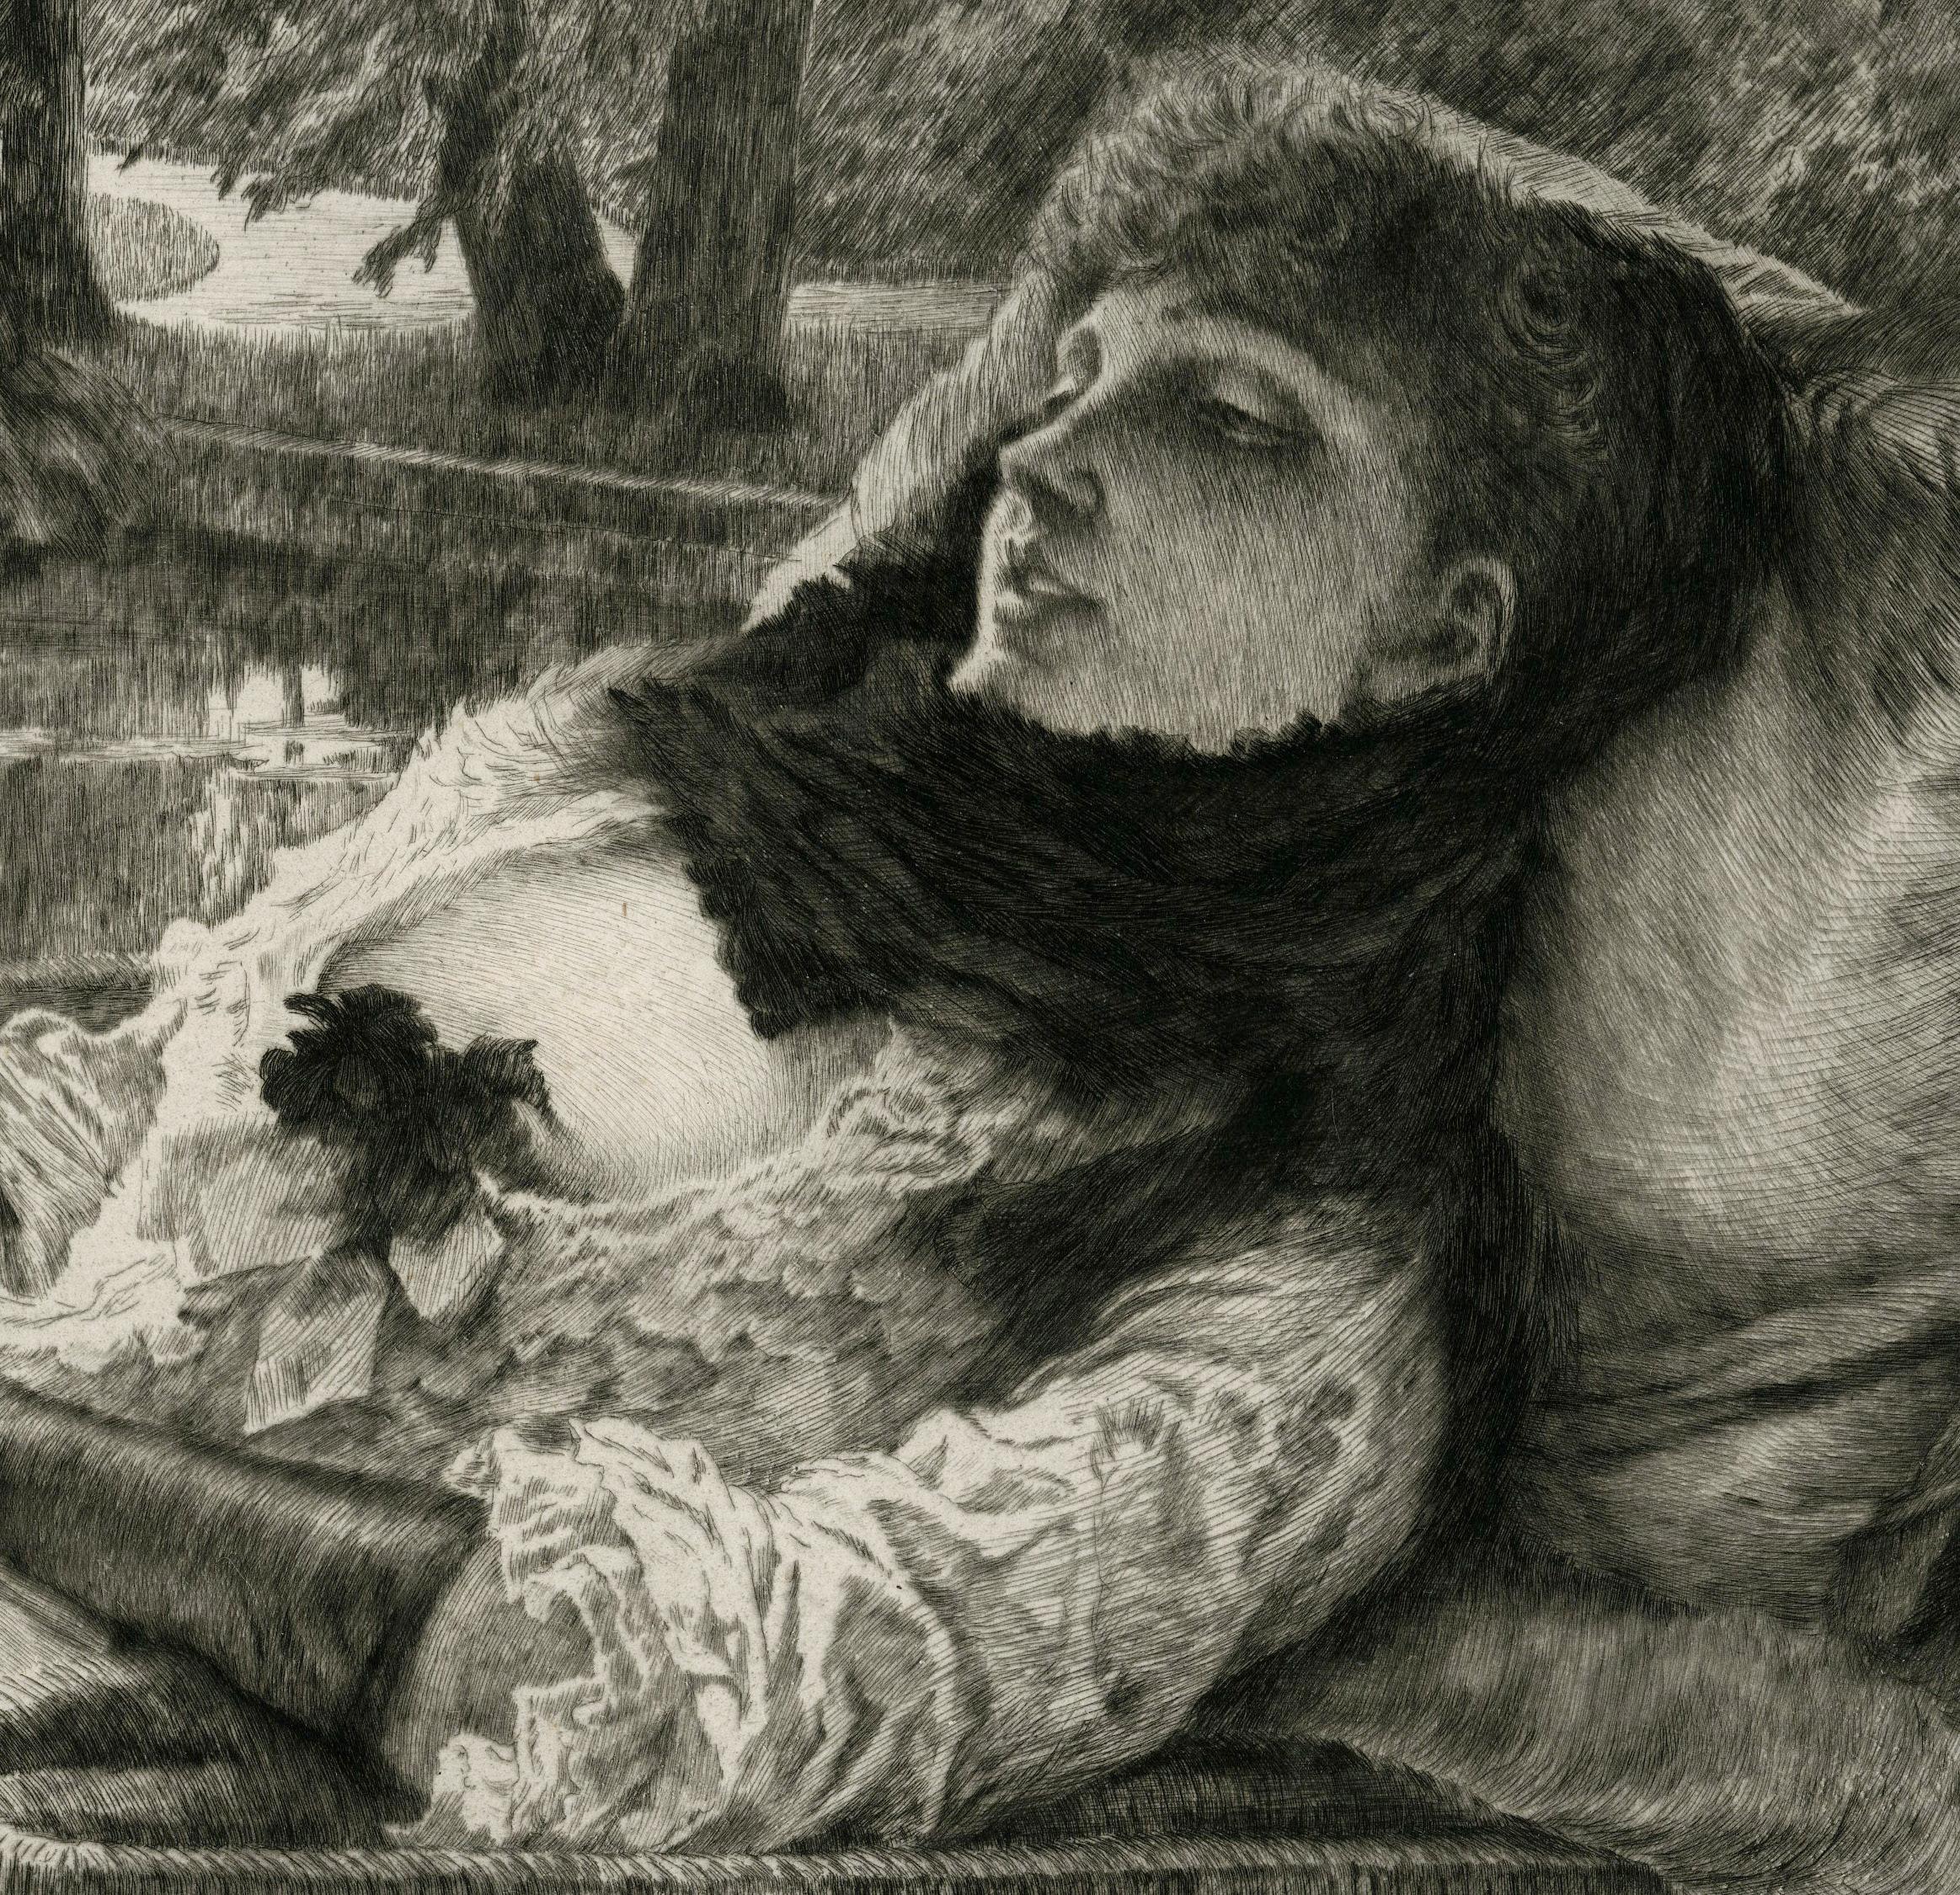 Soirée d'été (Summer Evening)
Etching & drypoint,  1881
Signed and dated in the plate lower left corner
Edition: c. 100 in both states; plate canceled
Tissot's lover, Irish divorcee Mrs. Kathleen Newton, resting on a chaise.
Brilliant impression